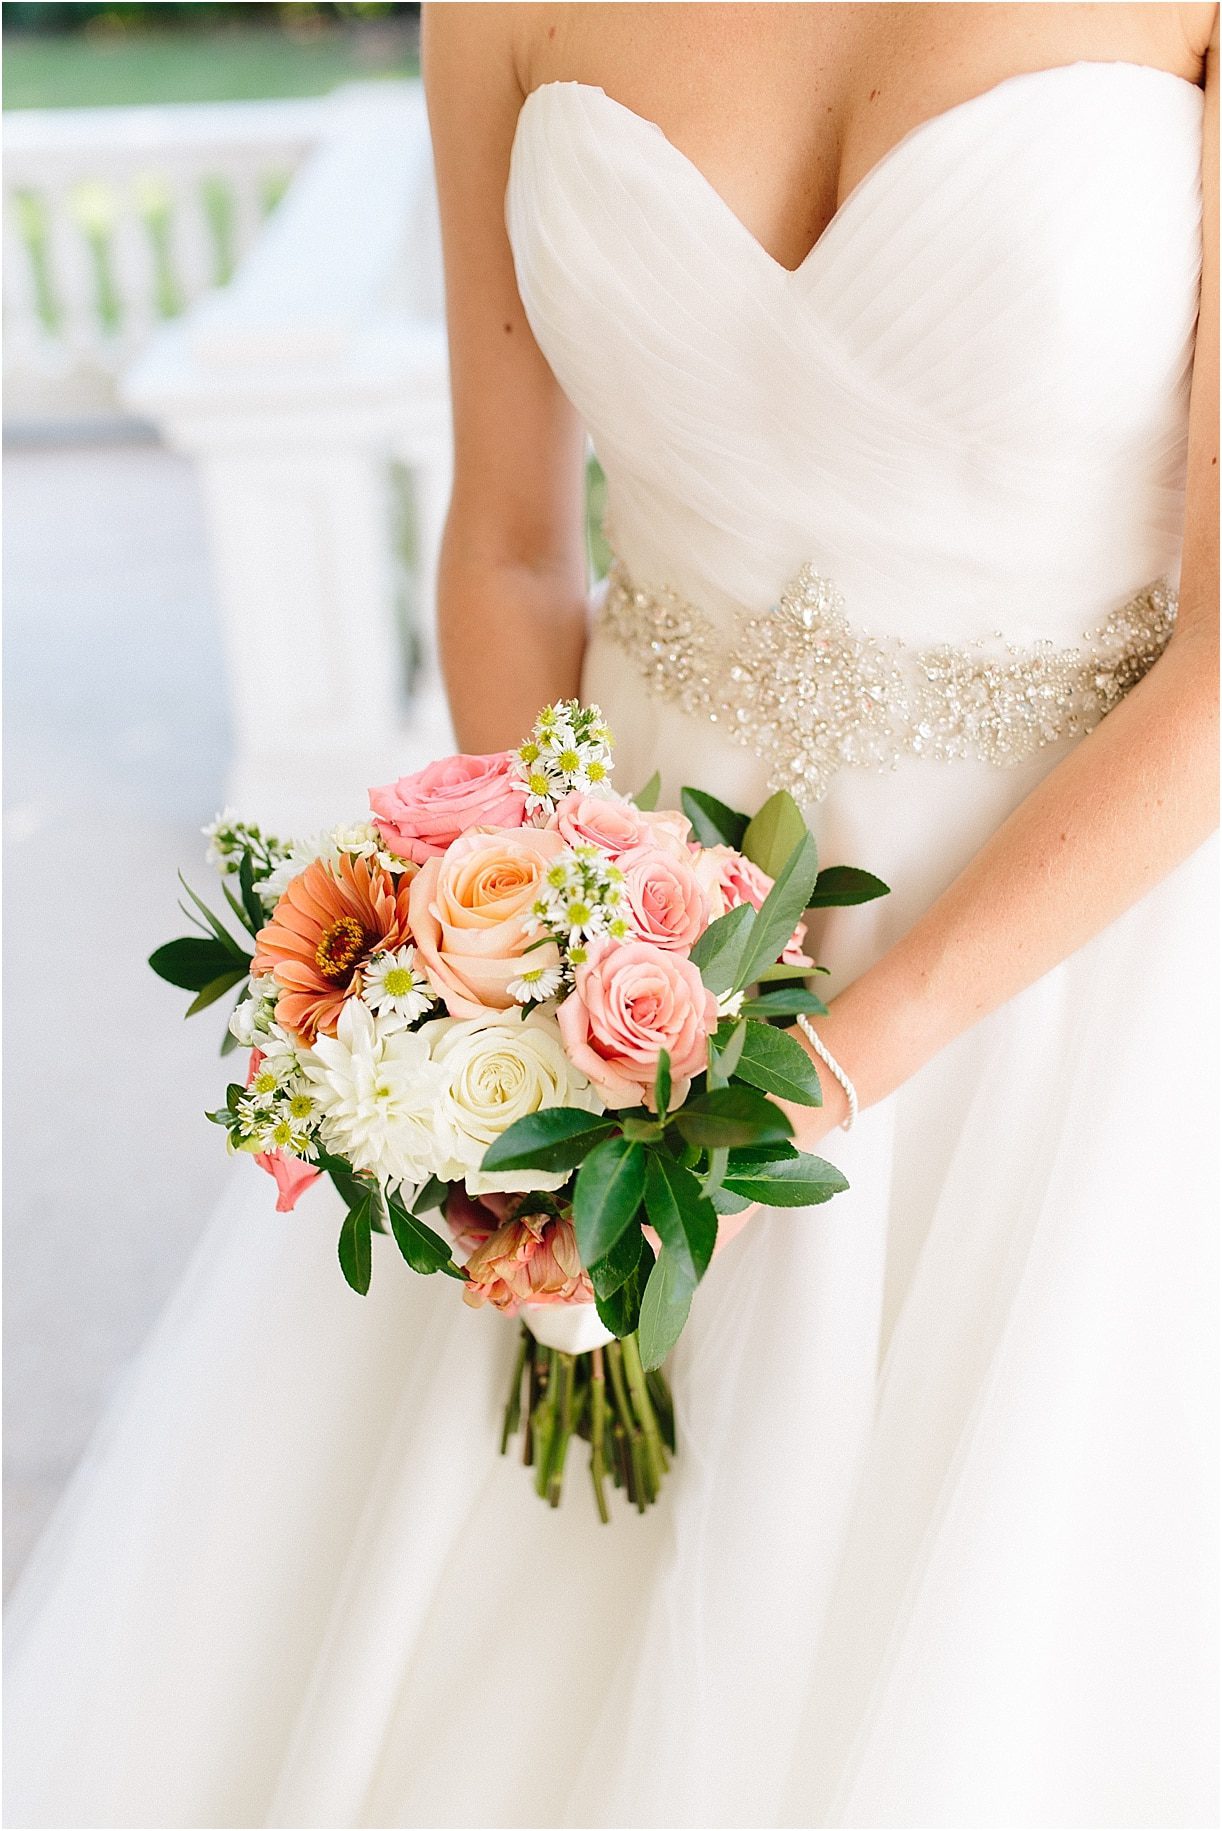 A Pink and Aqua Roanoke Virginia Wedding as seen on Hill City Bride Blog and Magazine - bouquet, flowers